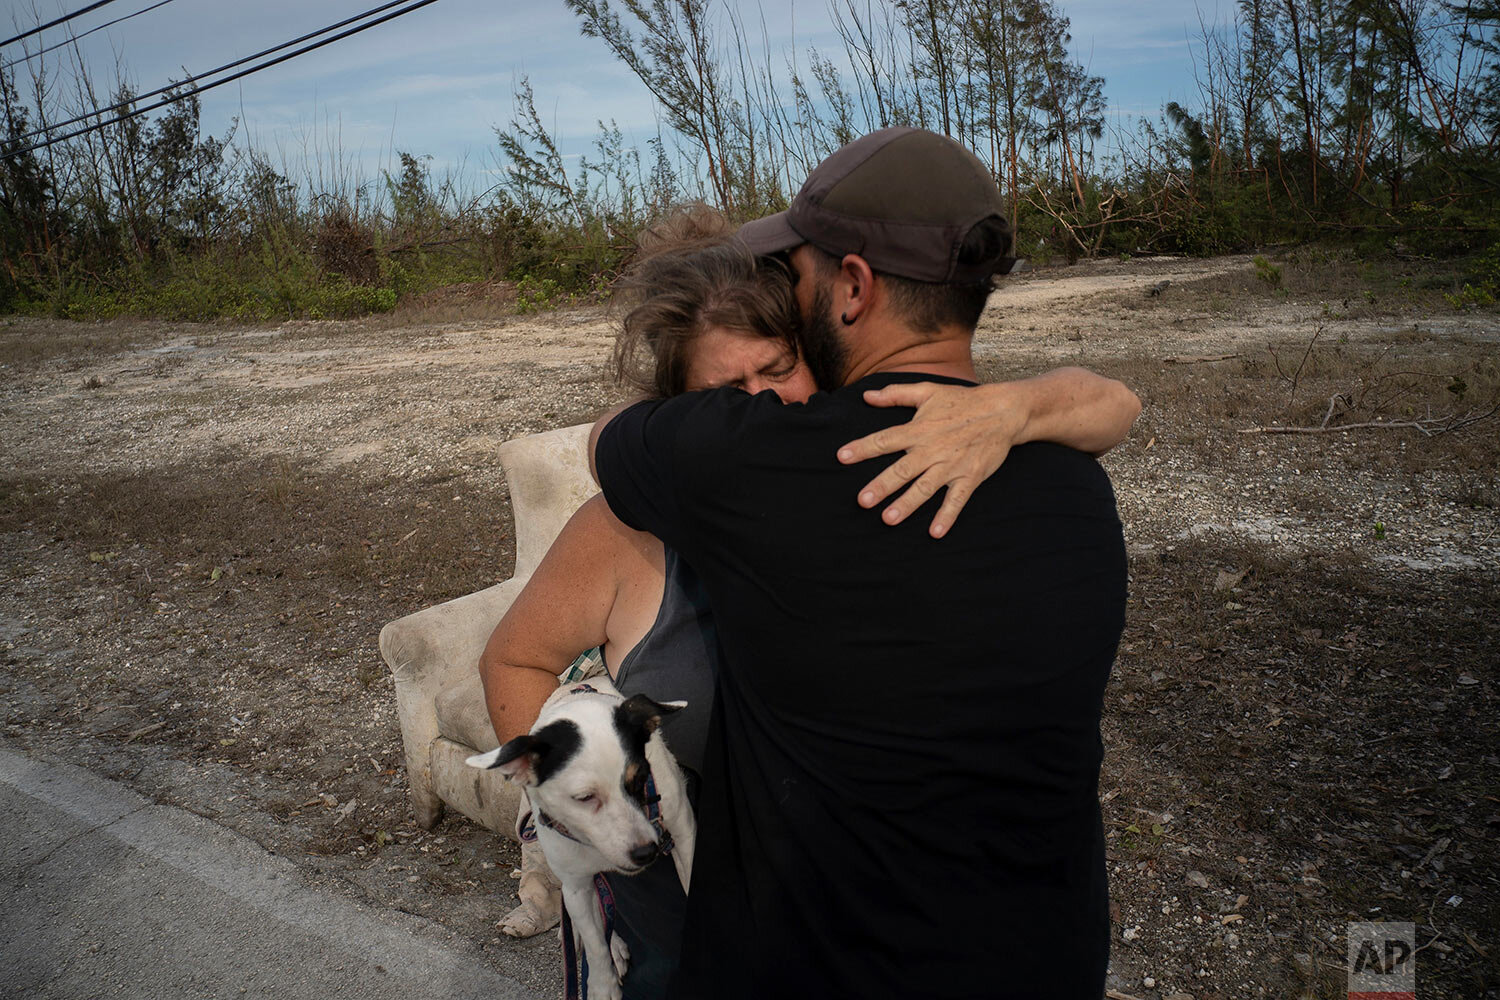  Sissel Mosvold embraces a volunteer who helped rescue her mother from her home, flooded by the waters of Hurricane Dorian, in the outskirts of Freeport, Bahamas, Wednesday, Sept. 4, 2019. (AP Photo/Ramon Espinosa) 